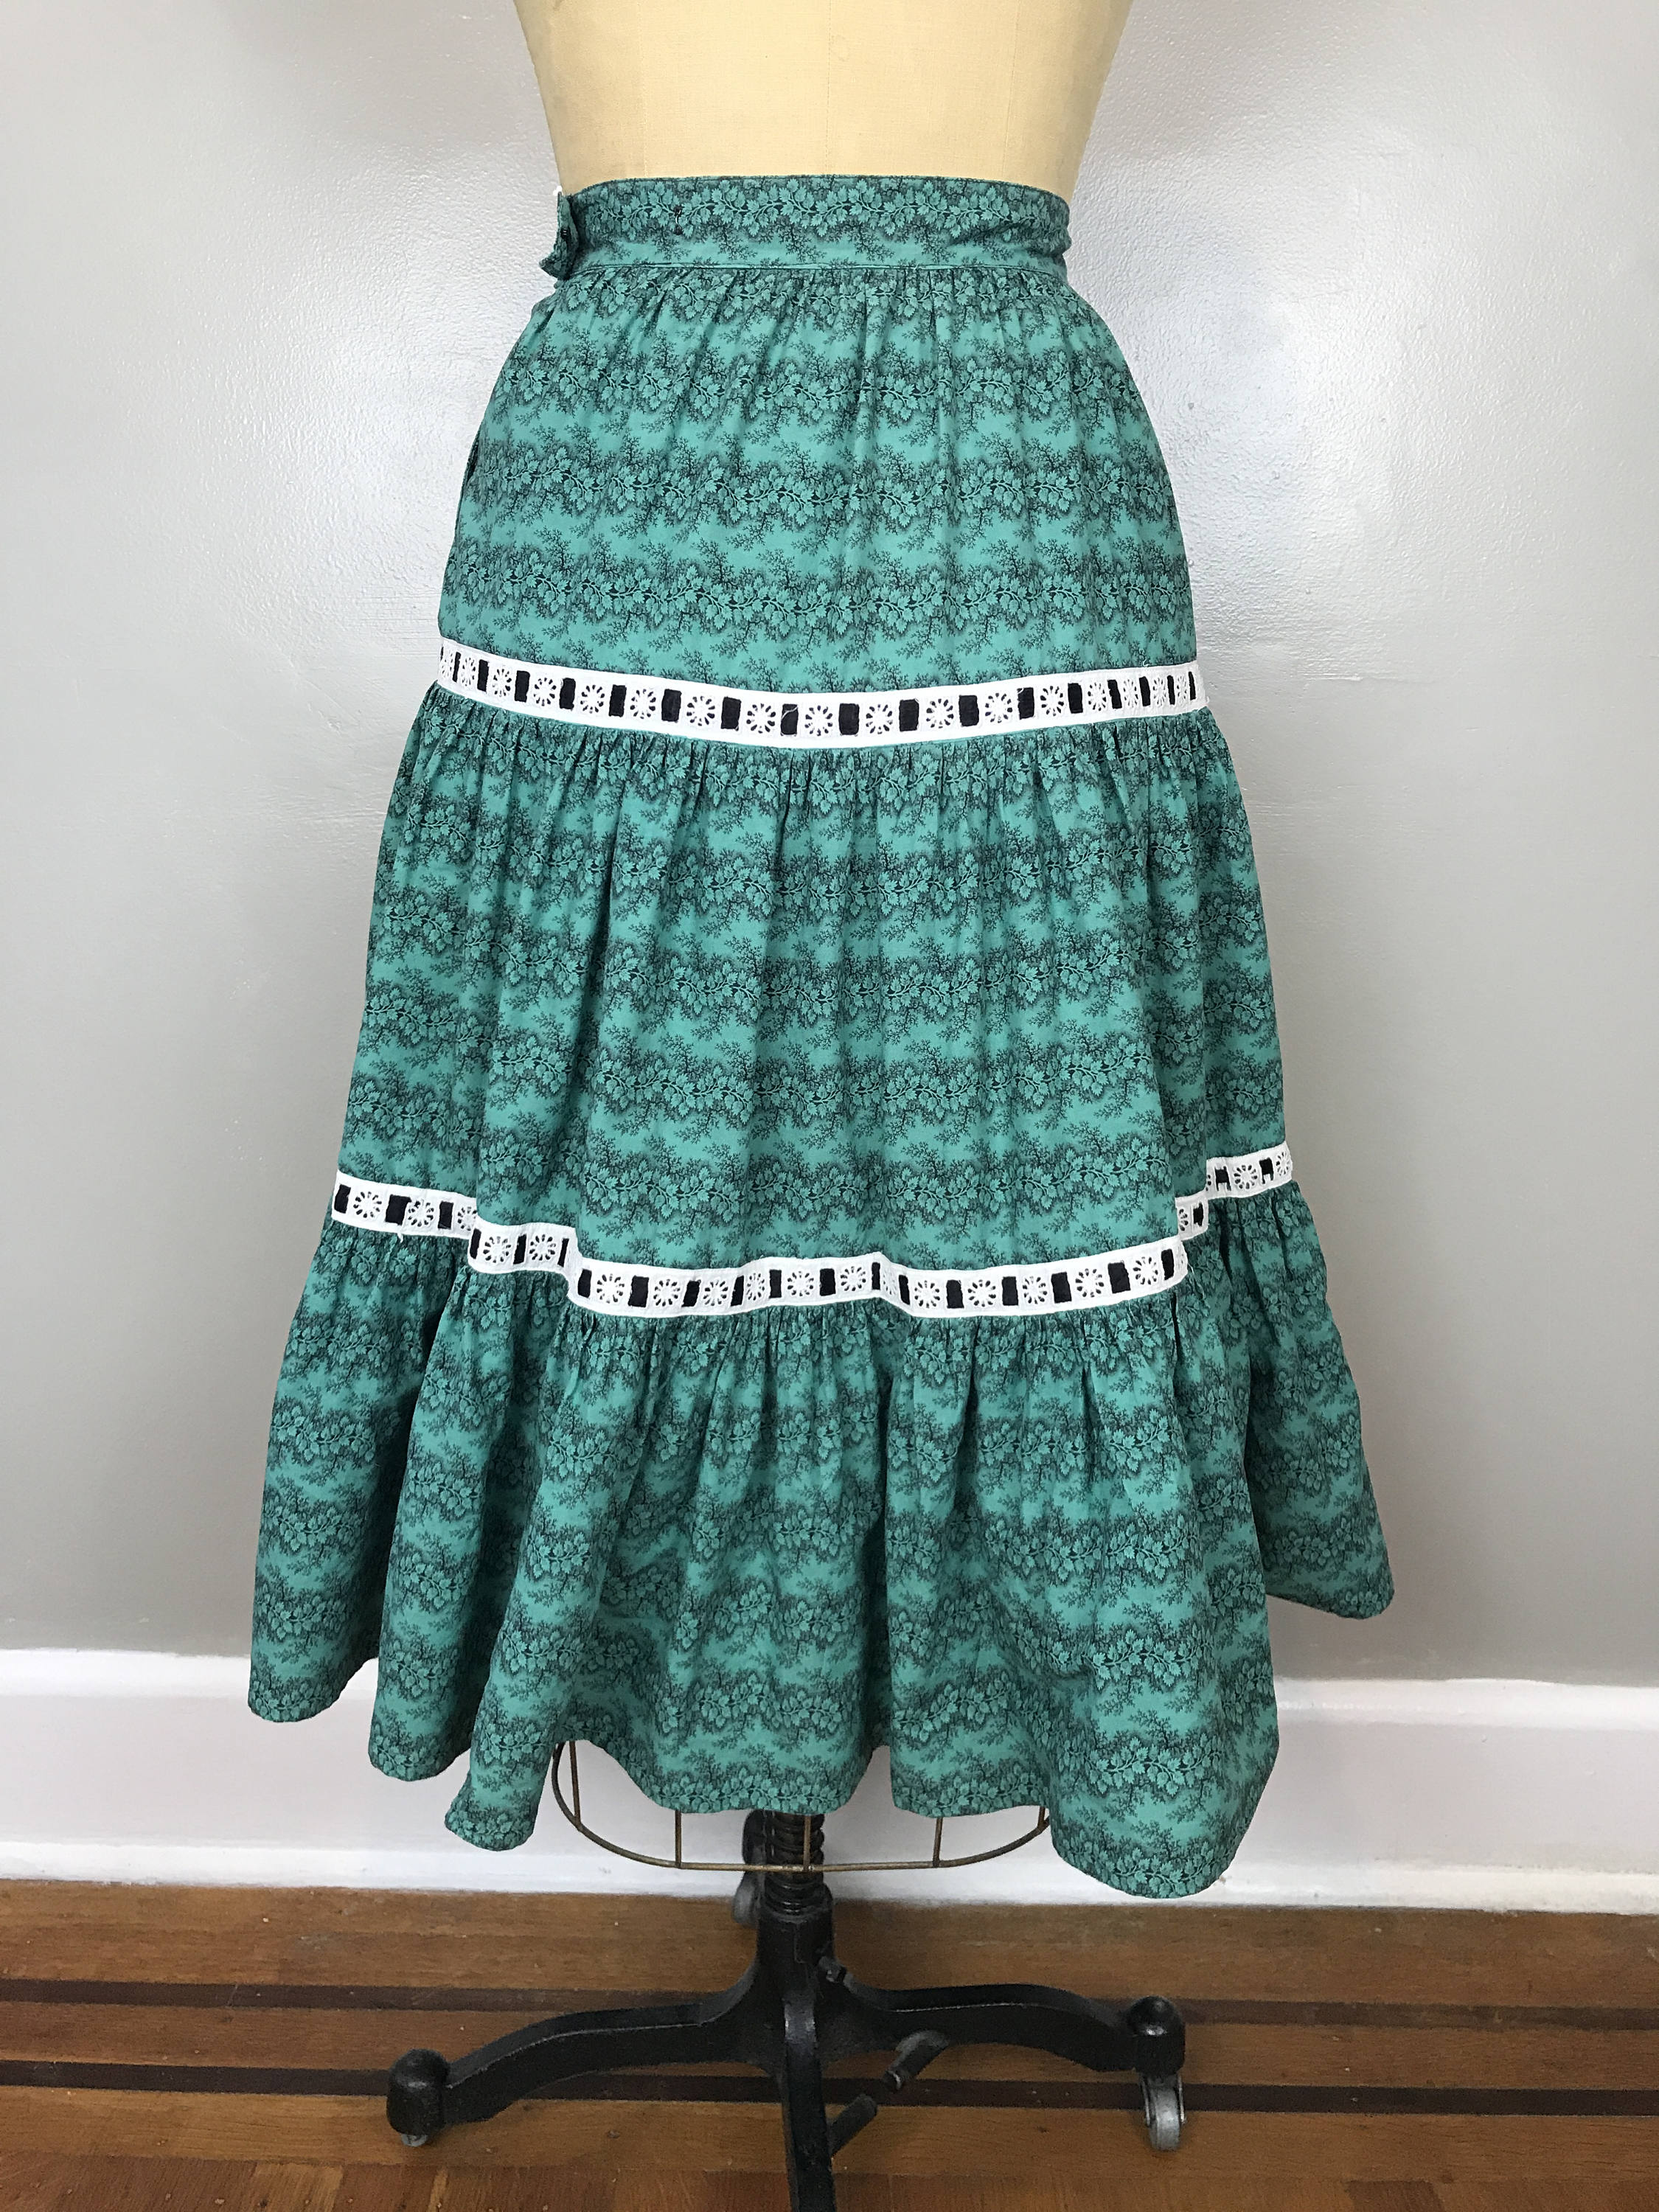 Green Patterned Tiered Skirt With Bows / 60's / Small | Etsy